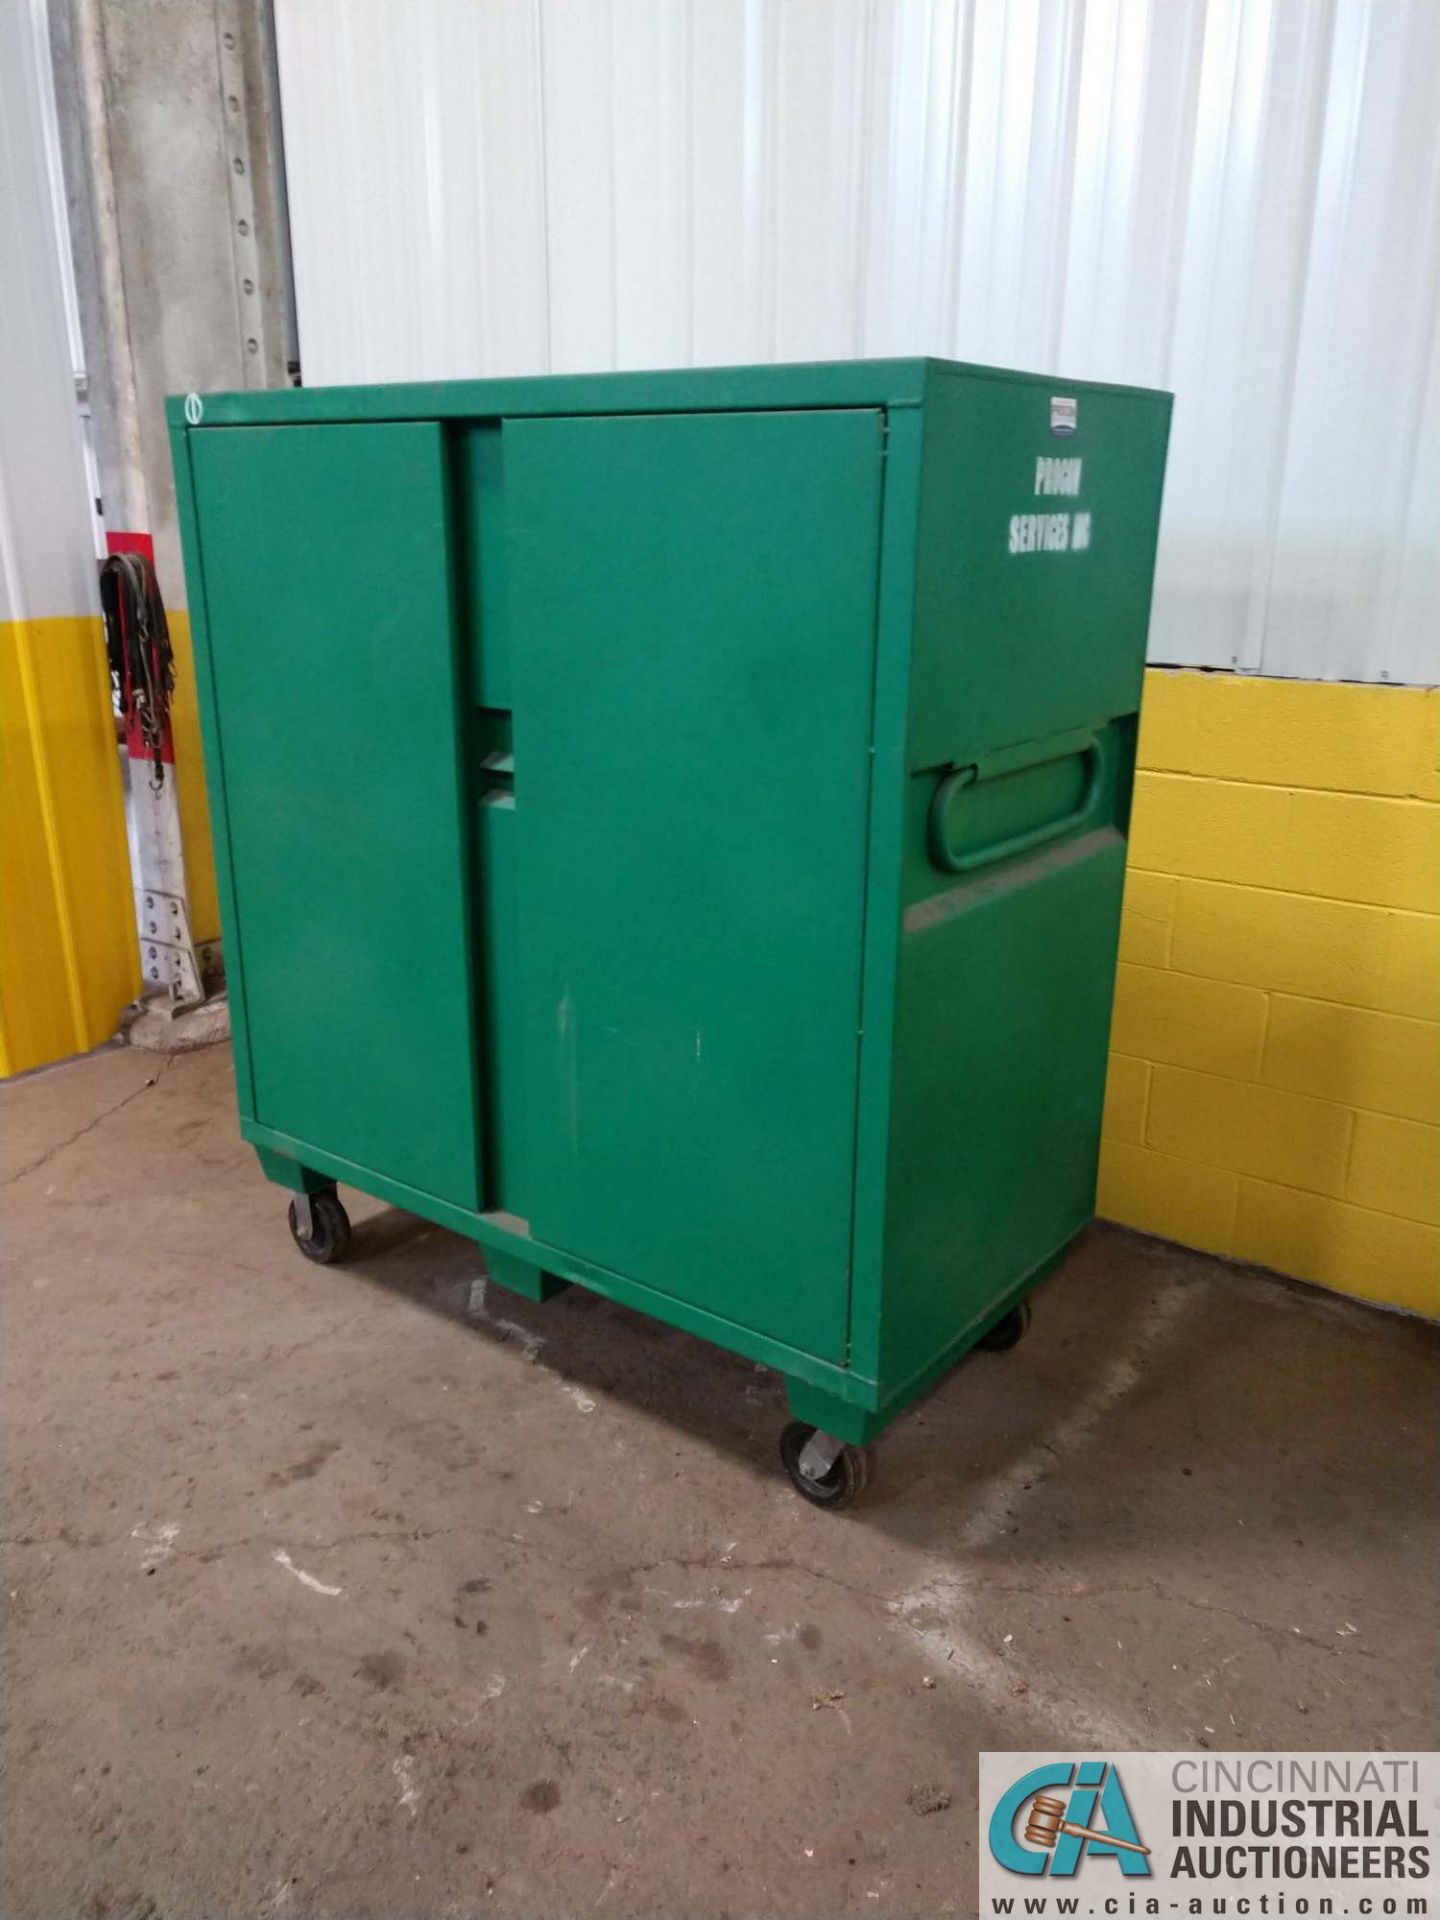 30" X 60" X 67" GREENLEE PORTABLE JOBOX CABINET ON CASTERS **LOCATED AT 1400 OAK ST., TOLEDO,